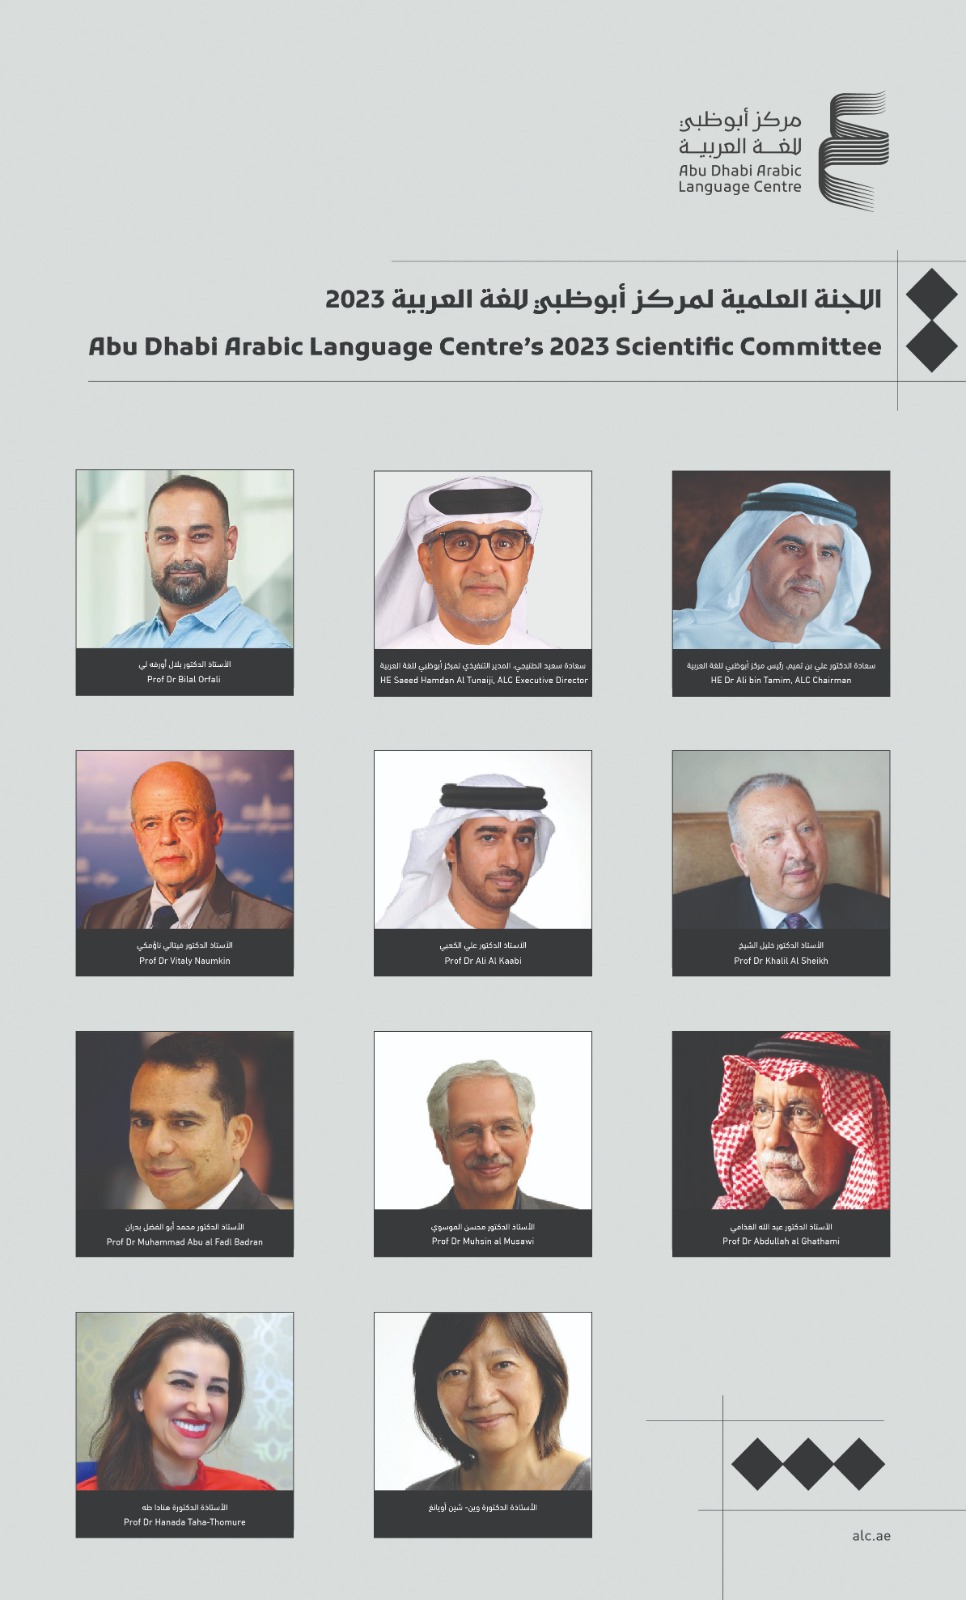 “Science” discusses Abu Dhabi Arabic Language Center programs and initiatives